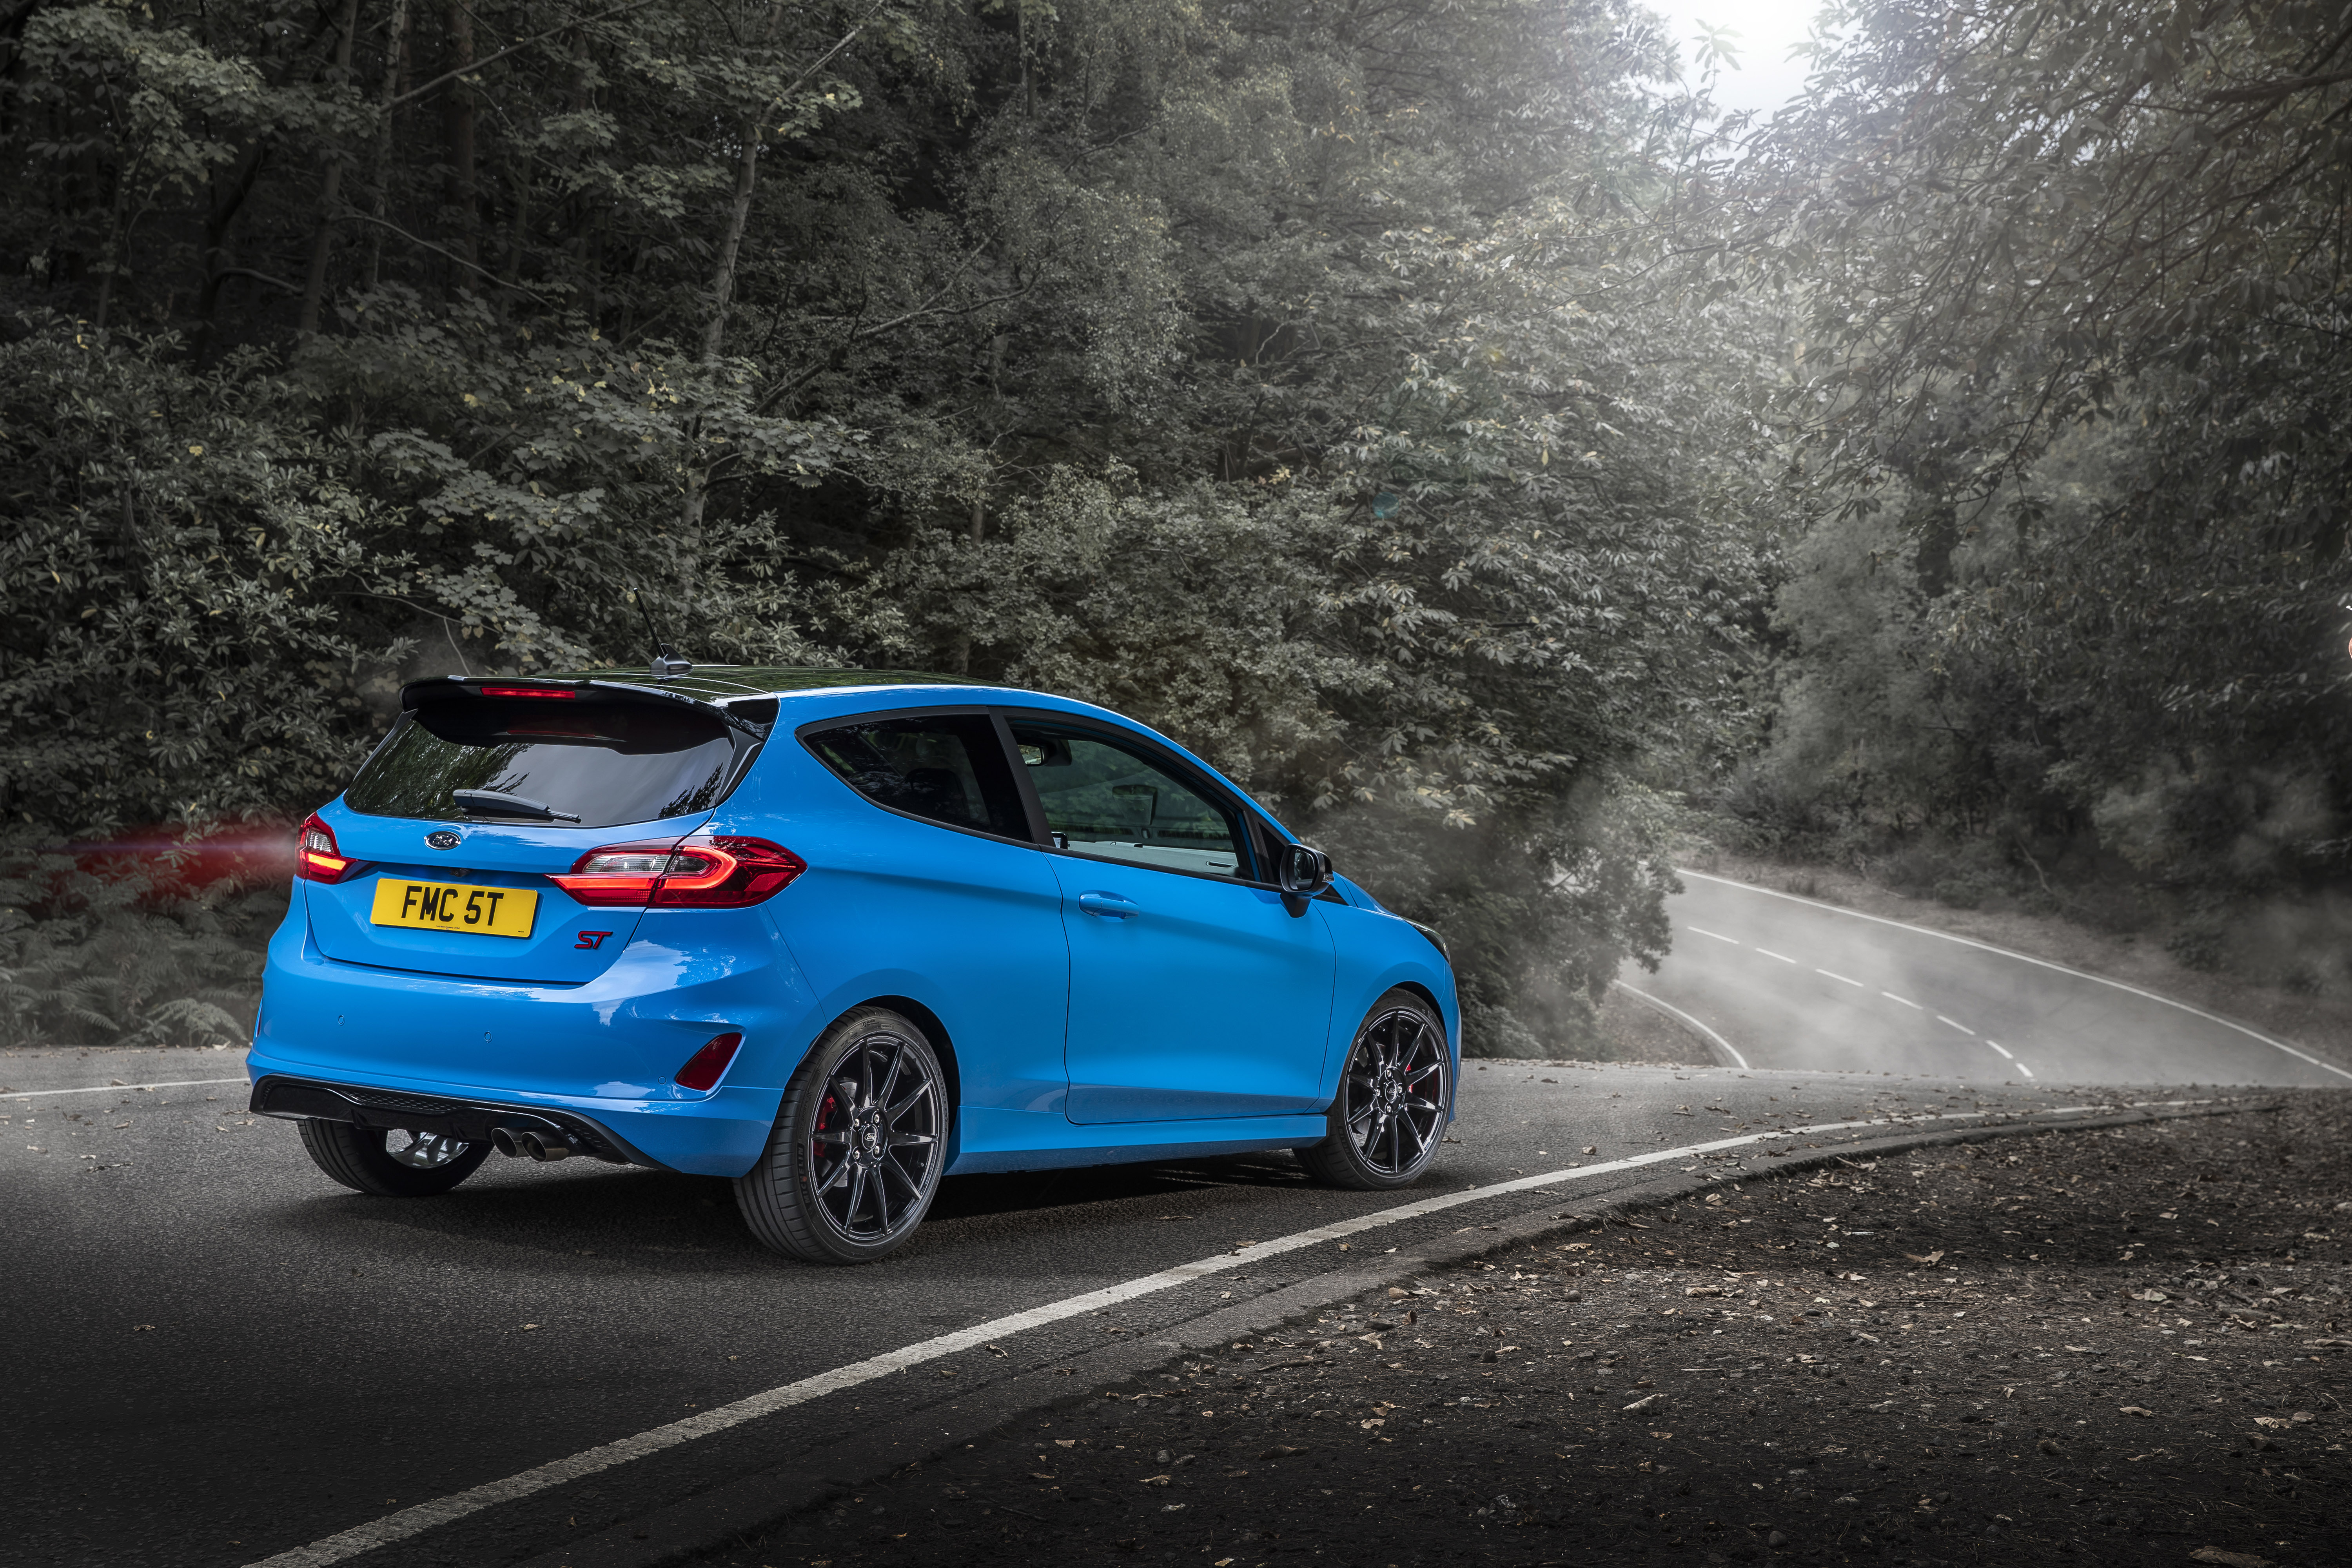 New Ford Fiesta St Edition Is A Track Optimised Hot Hatch Shropshire Star